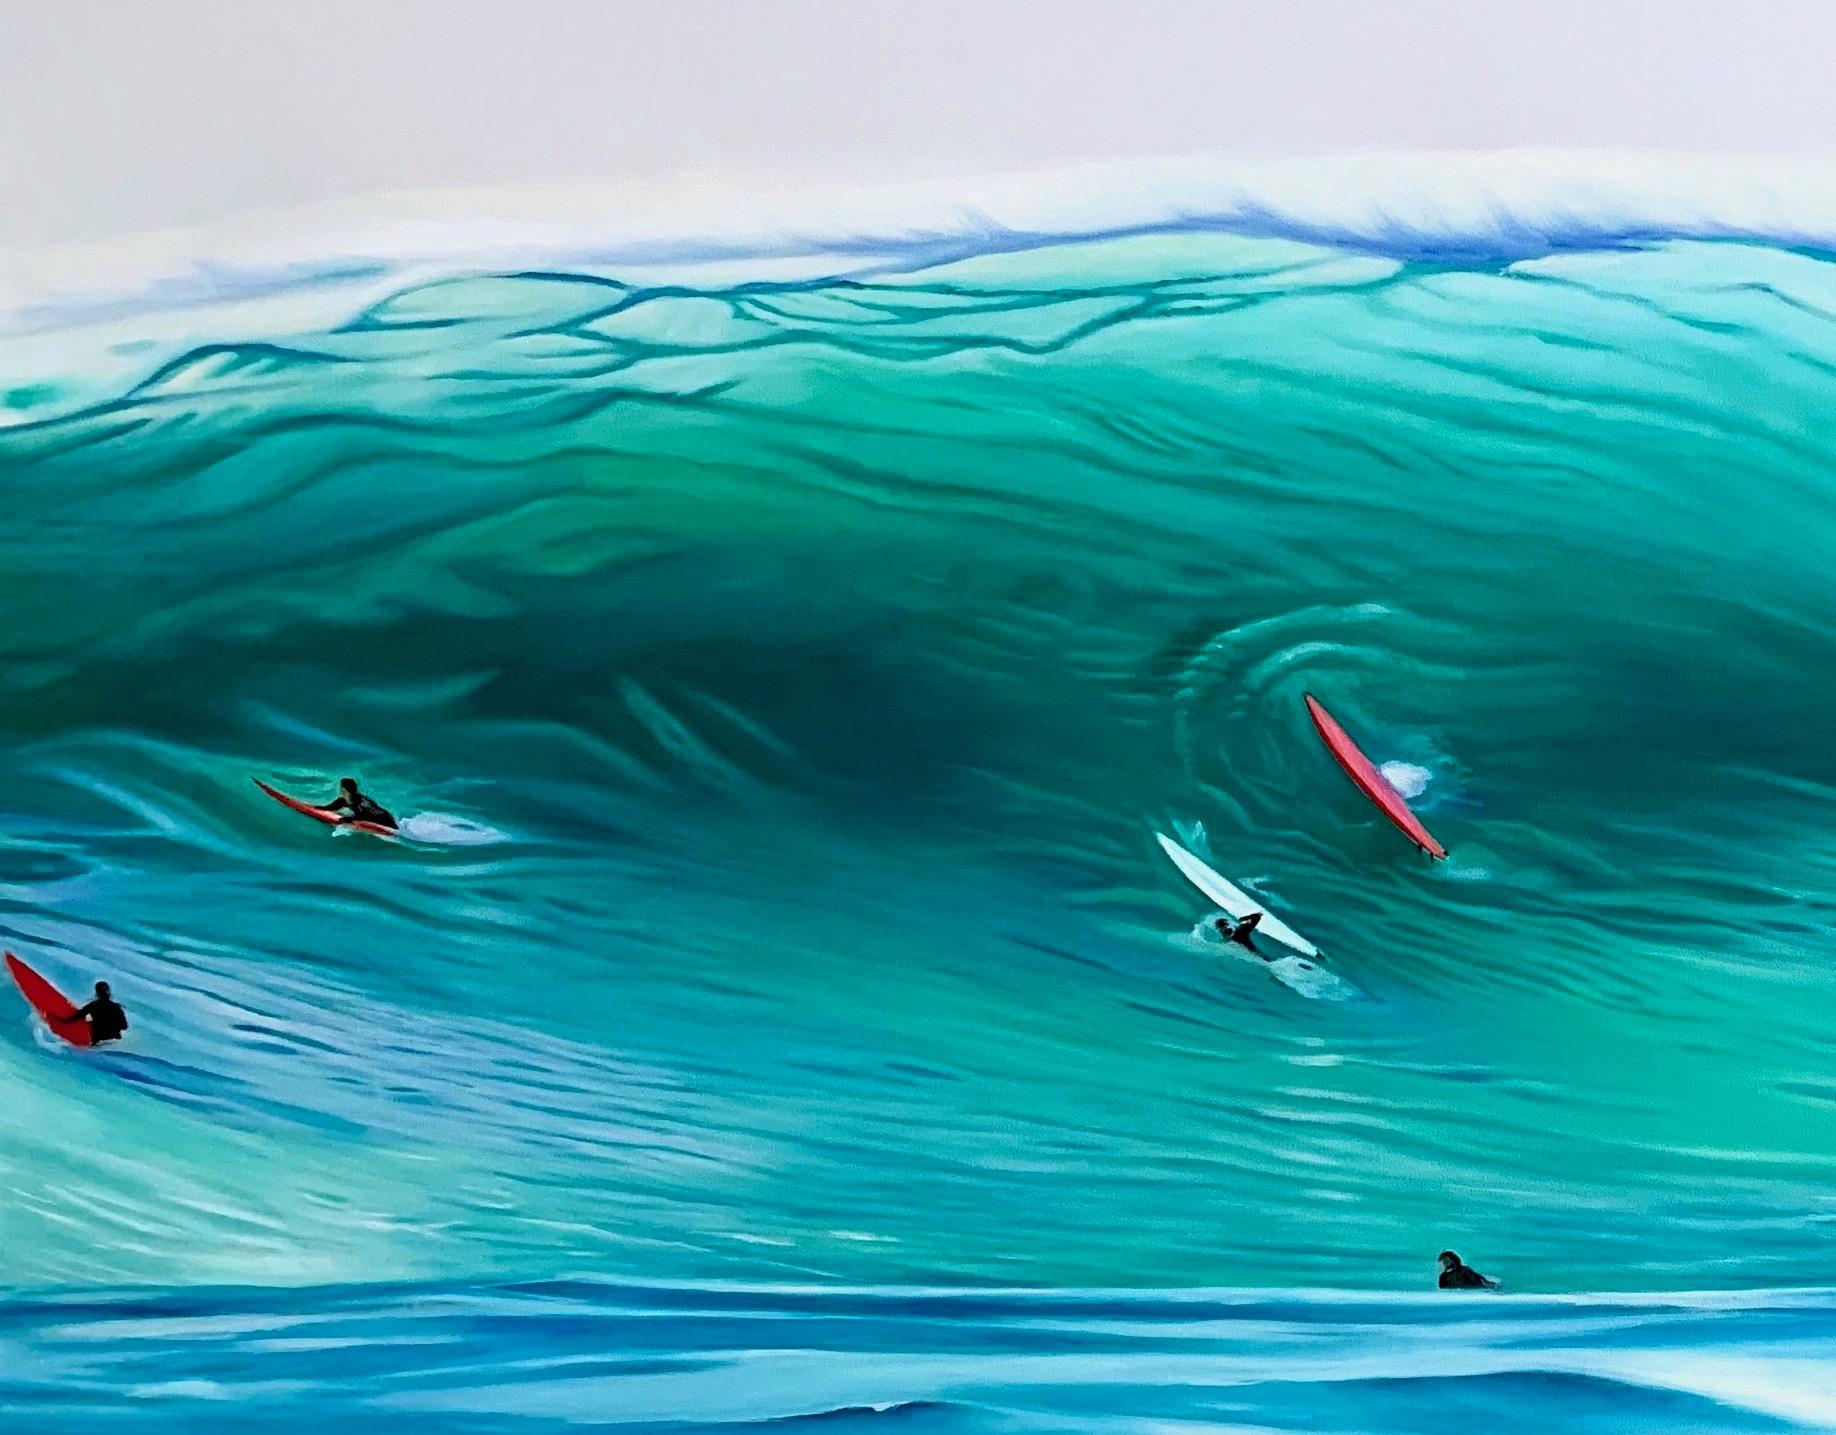 Large Big Wave Painting at Dungeons South Africa 72